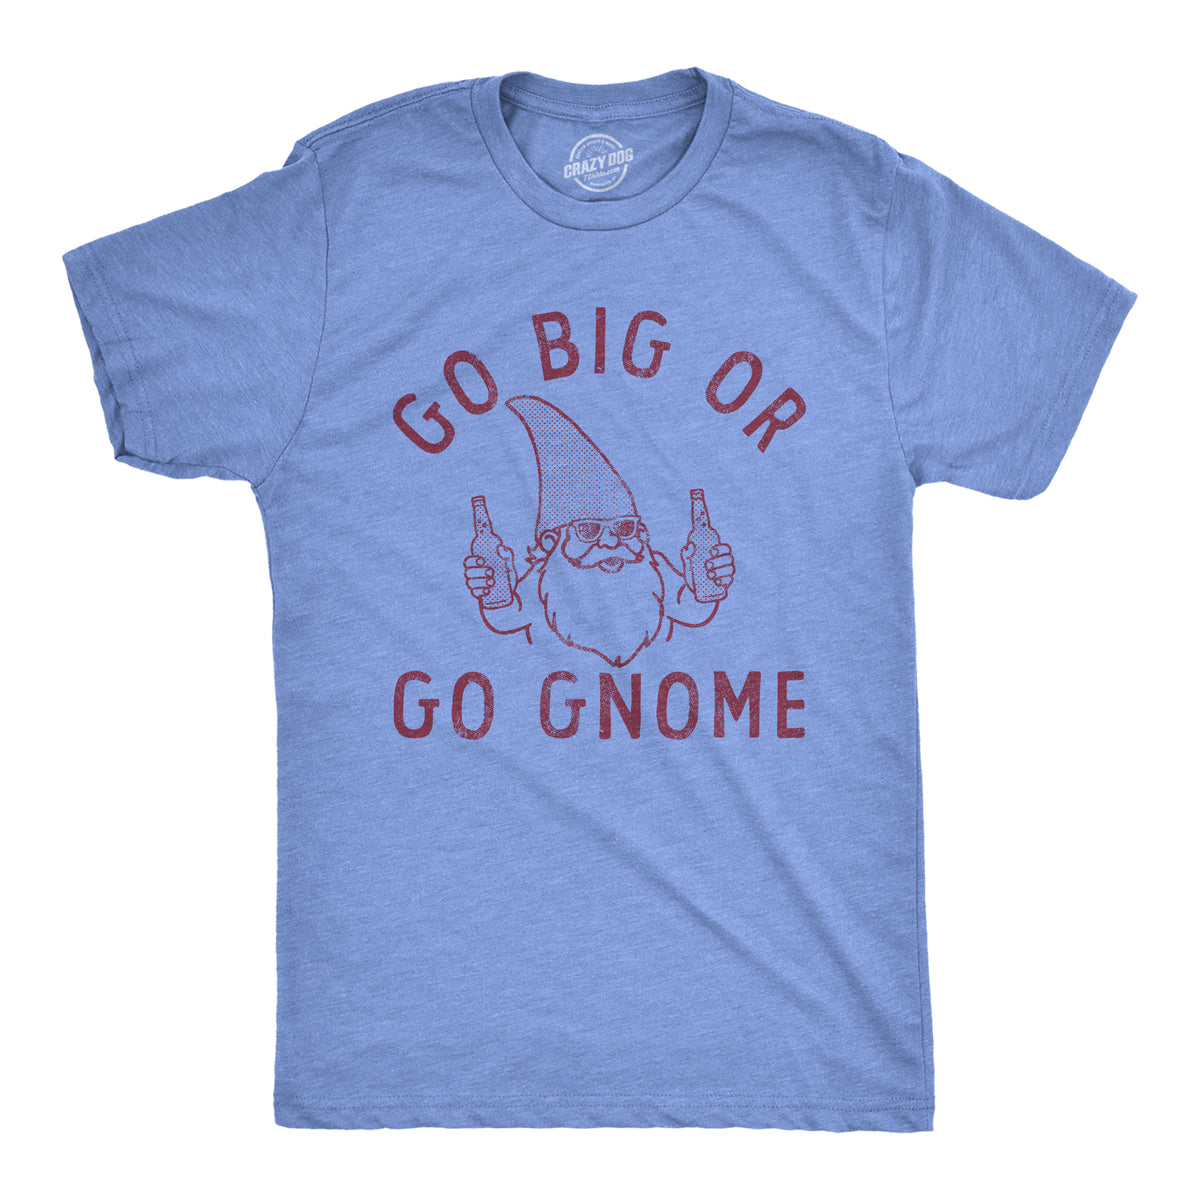 Funny Light Heather Blue Go Big Or Go Gnome Mens T Shirt Nerdy drinking Tee